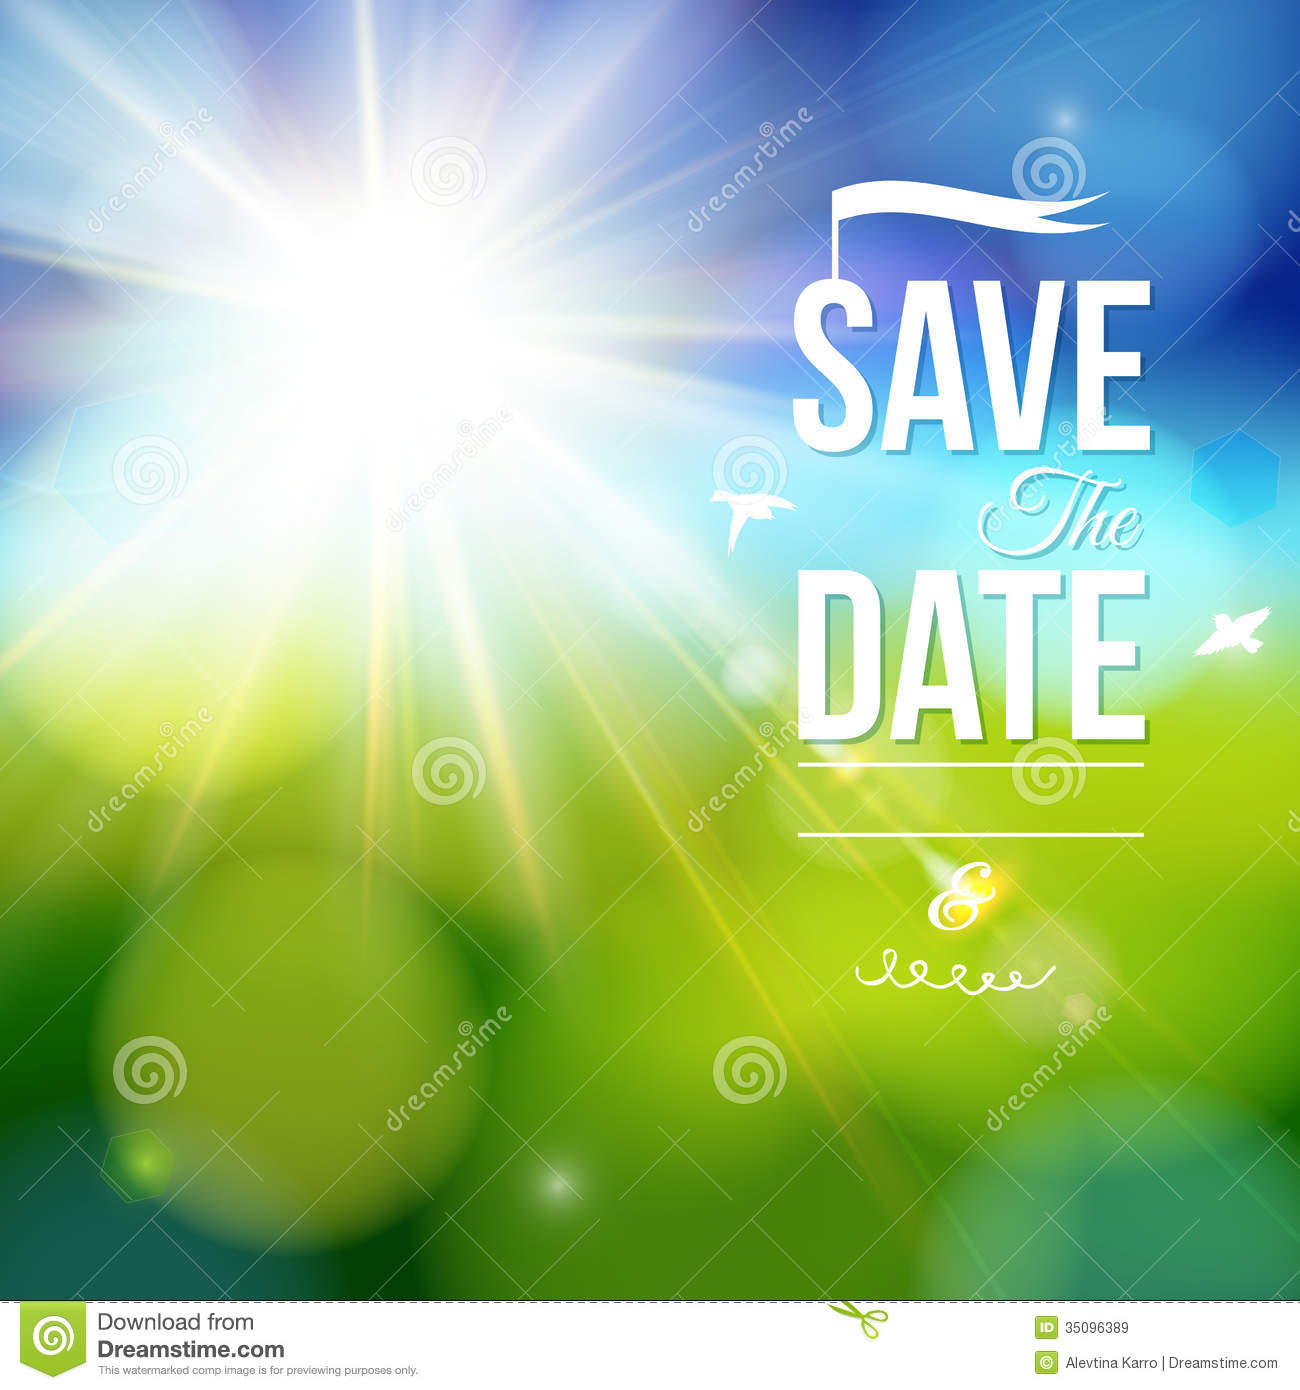 Save The Date For Personal Holiday  Royalty Free Stock Images   Image